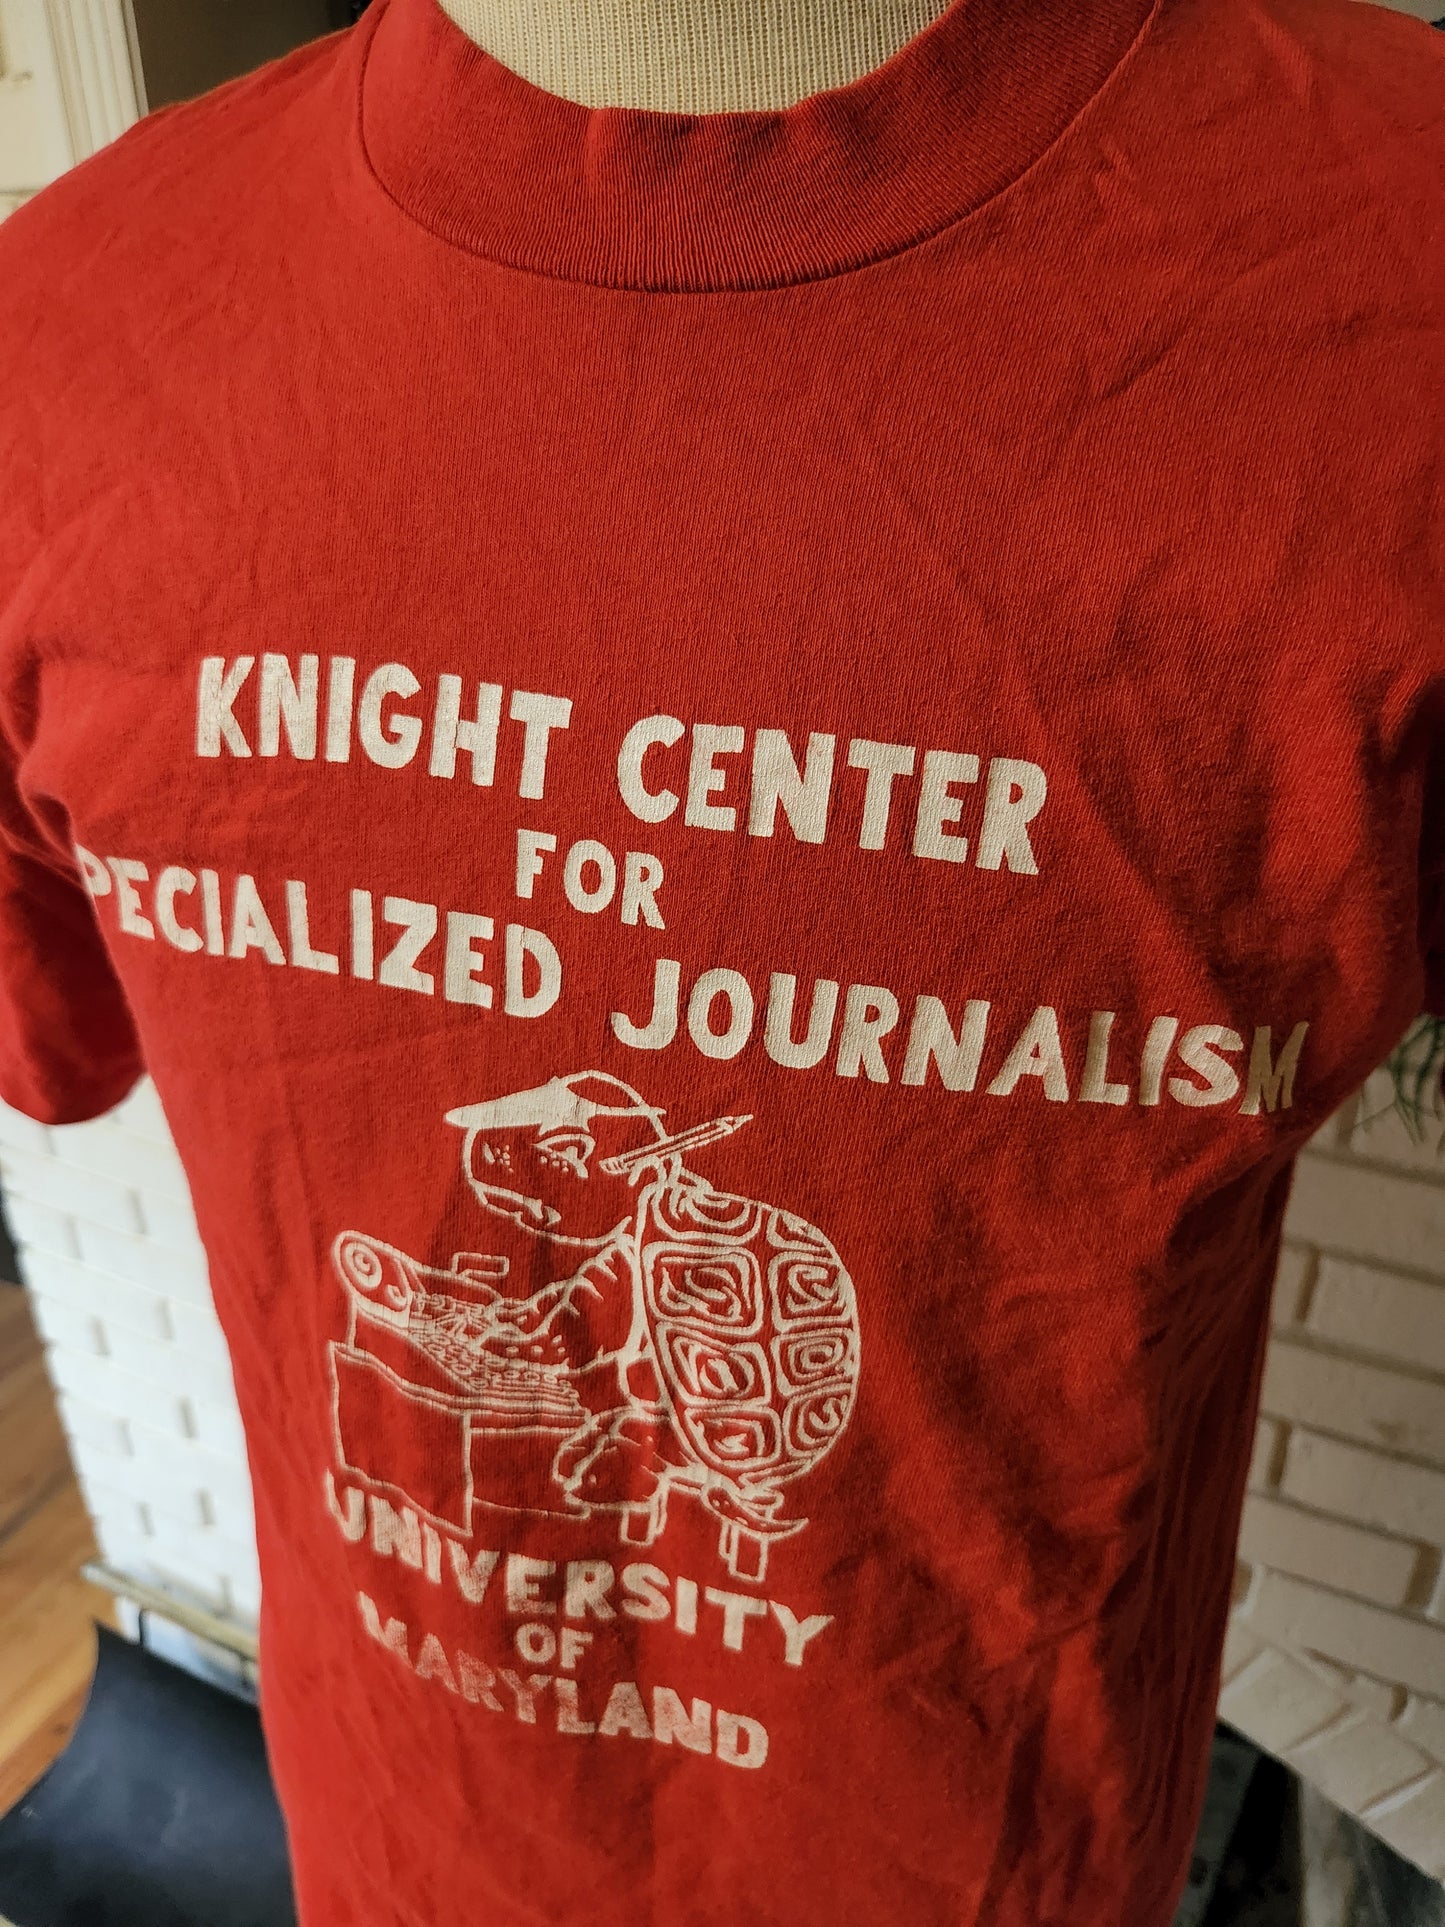 Vintage Knight Center Journalism T Shirt by Fruit of the Loom